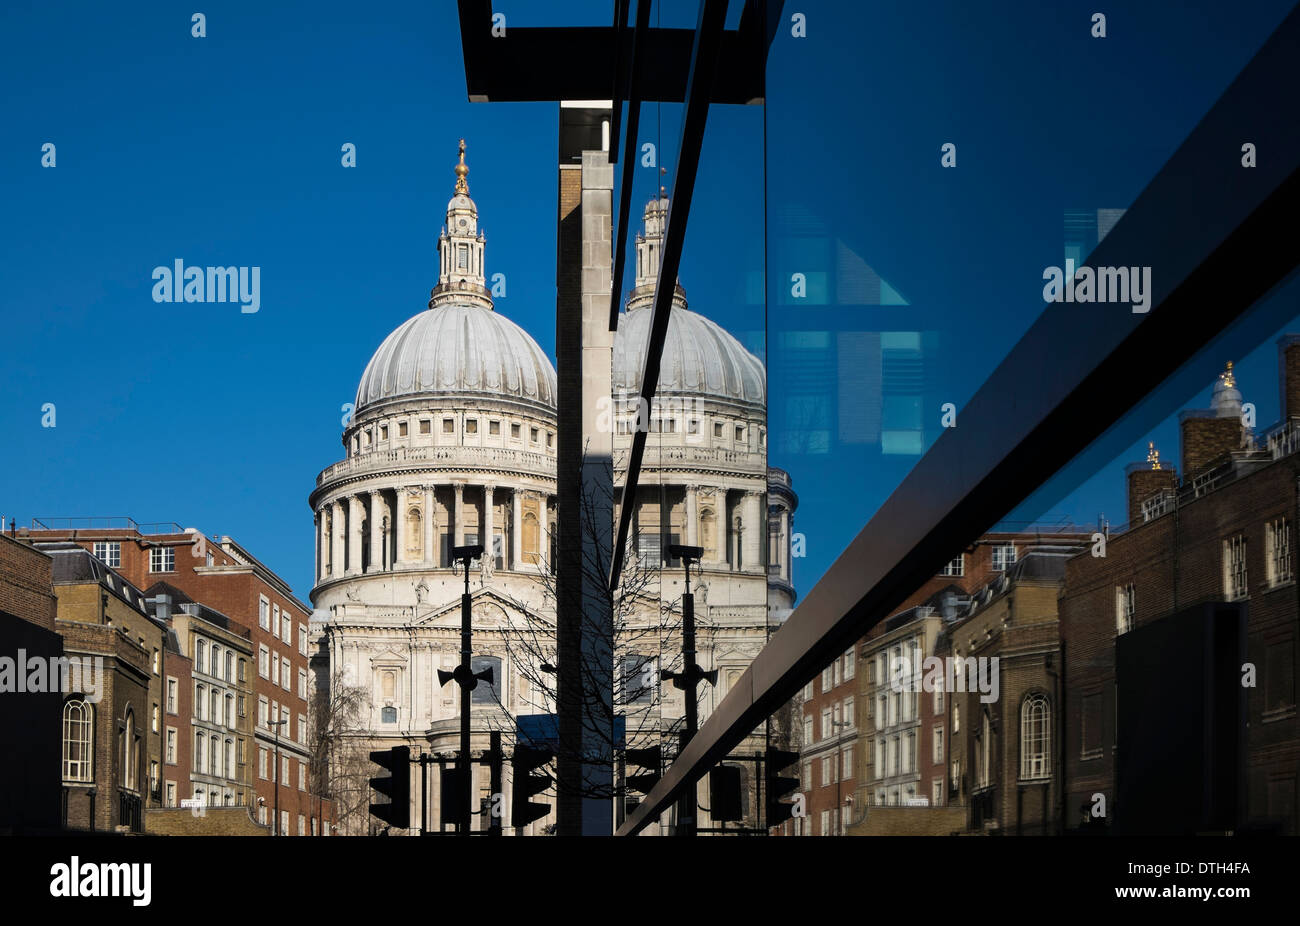 St Paul's Cathedral with a reflection to the right in the glass of an office building. Stock Photo